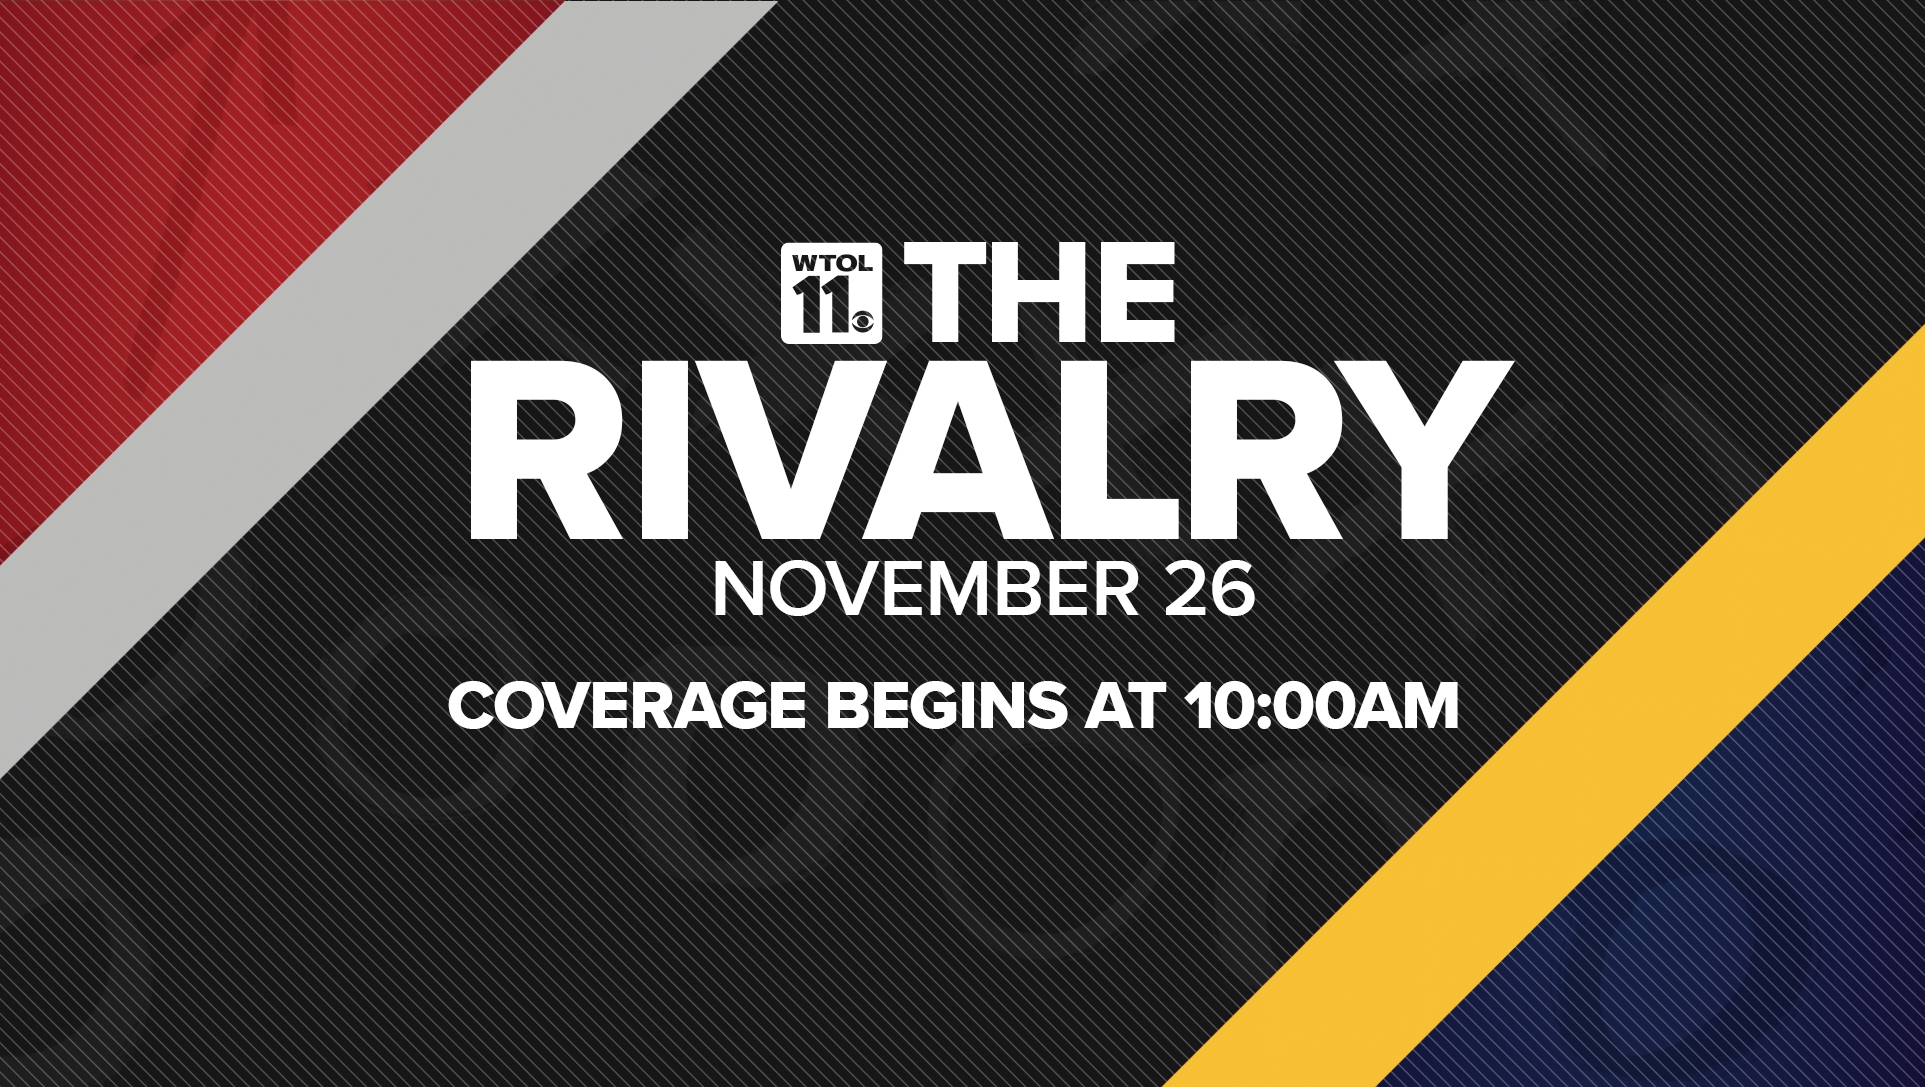 Catch The Rivalry on WTOL11 before Saturday's game